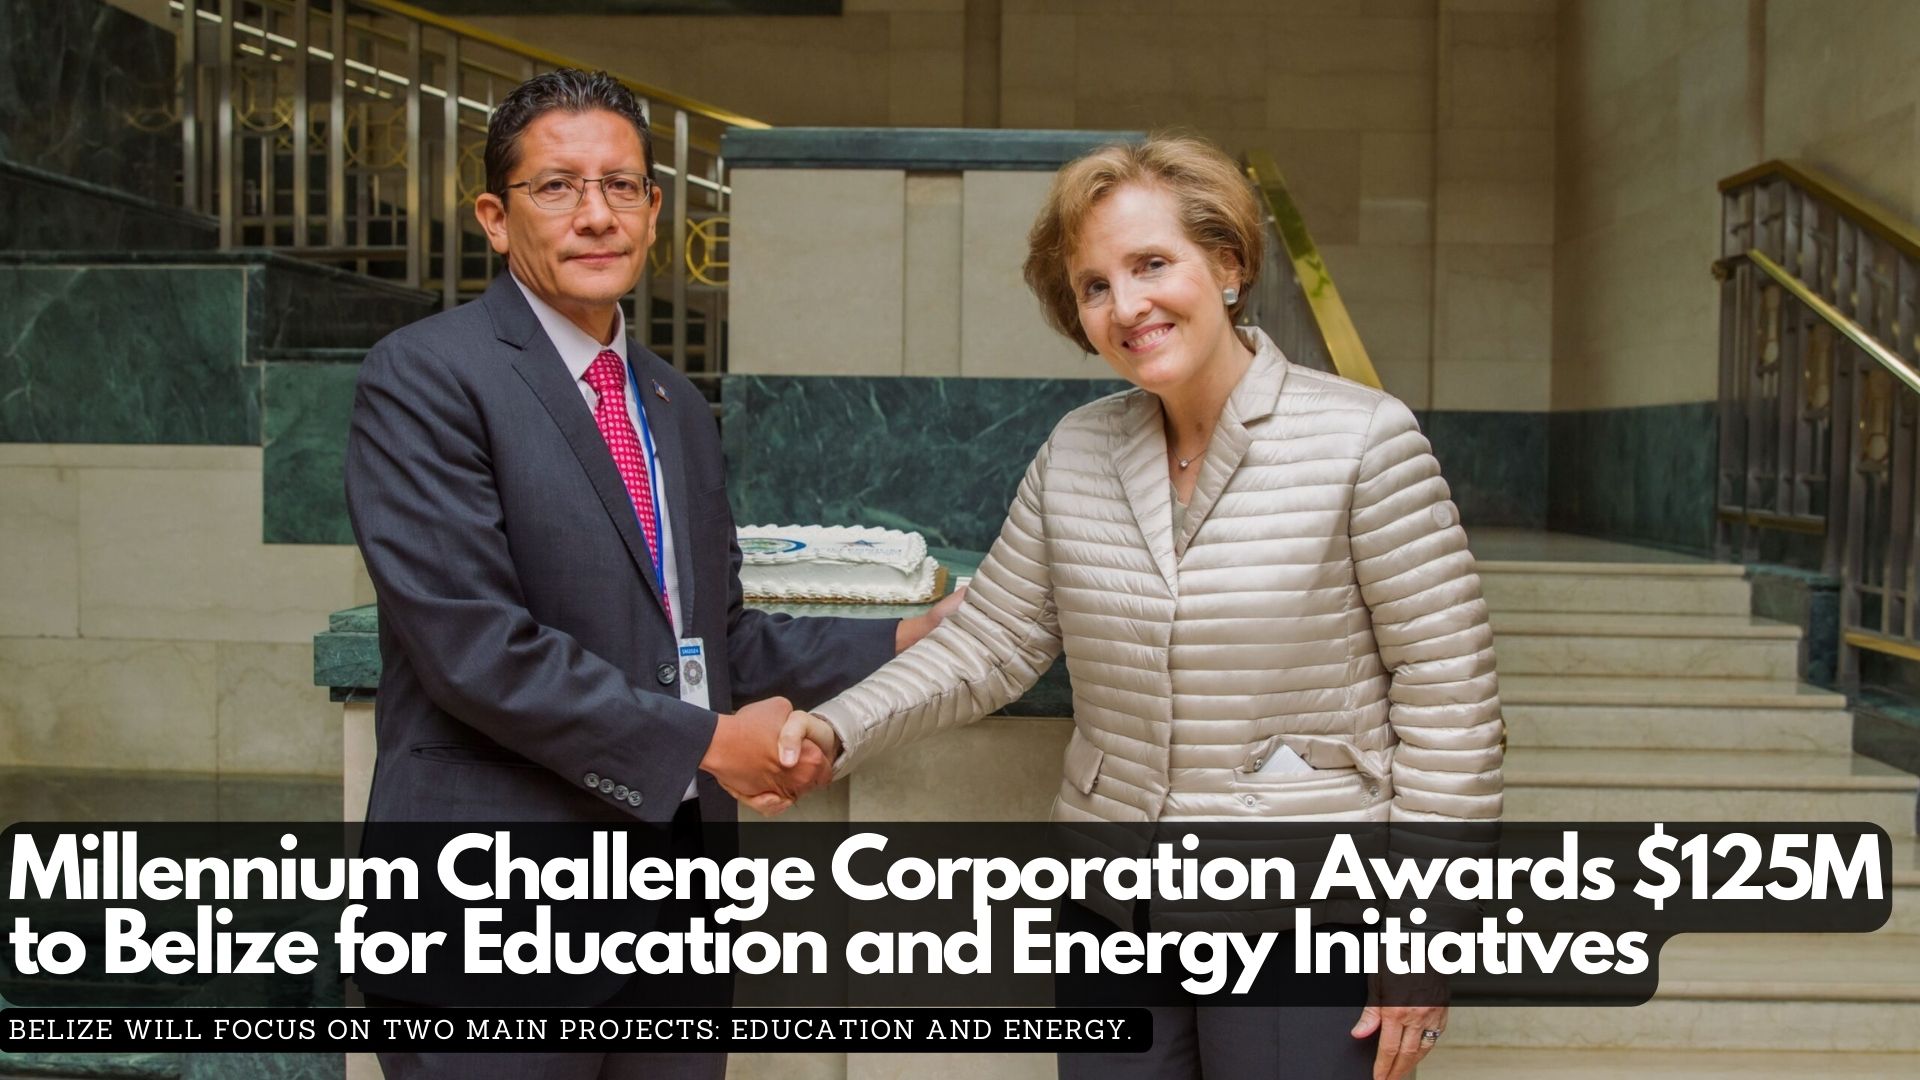 Millennium Challenge Corporation Awards $125M to Belize for Education and Energy Initiatives